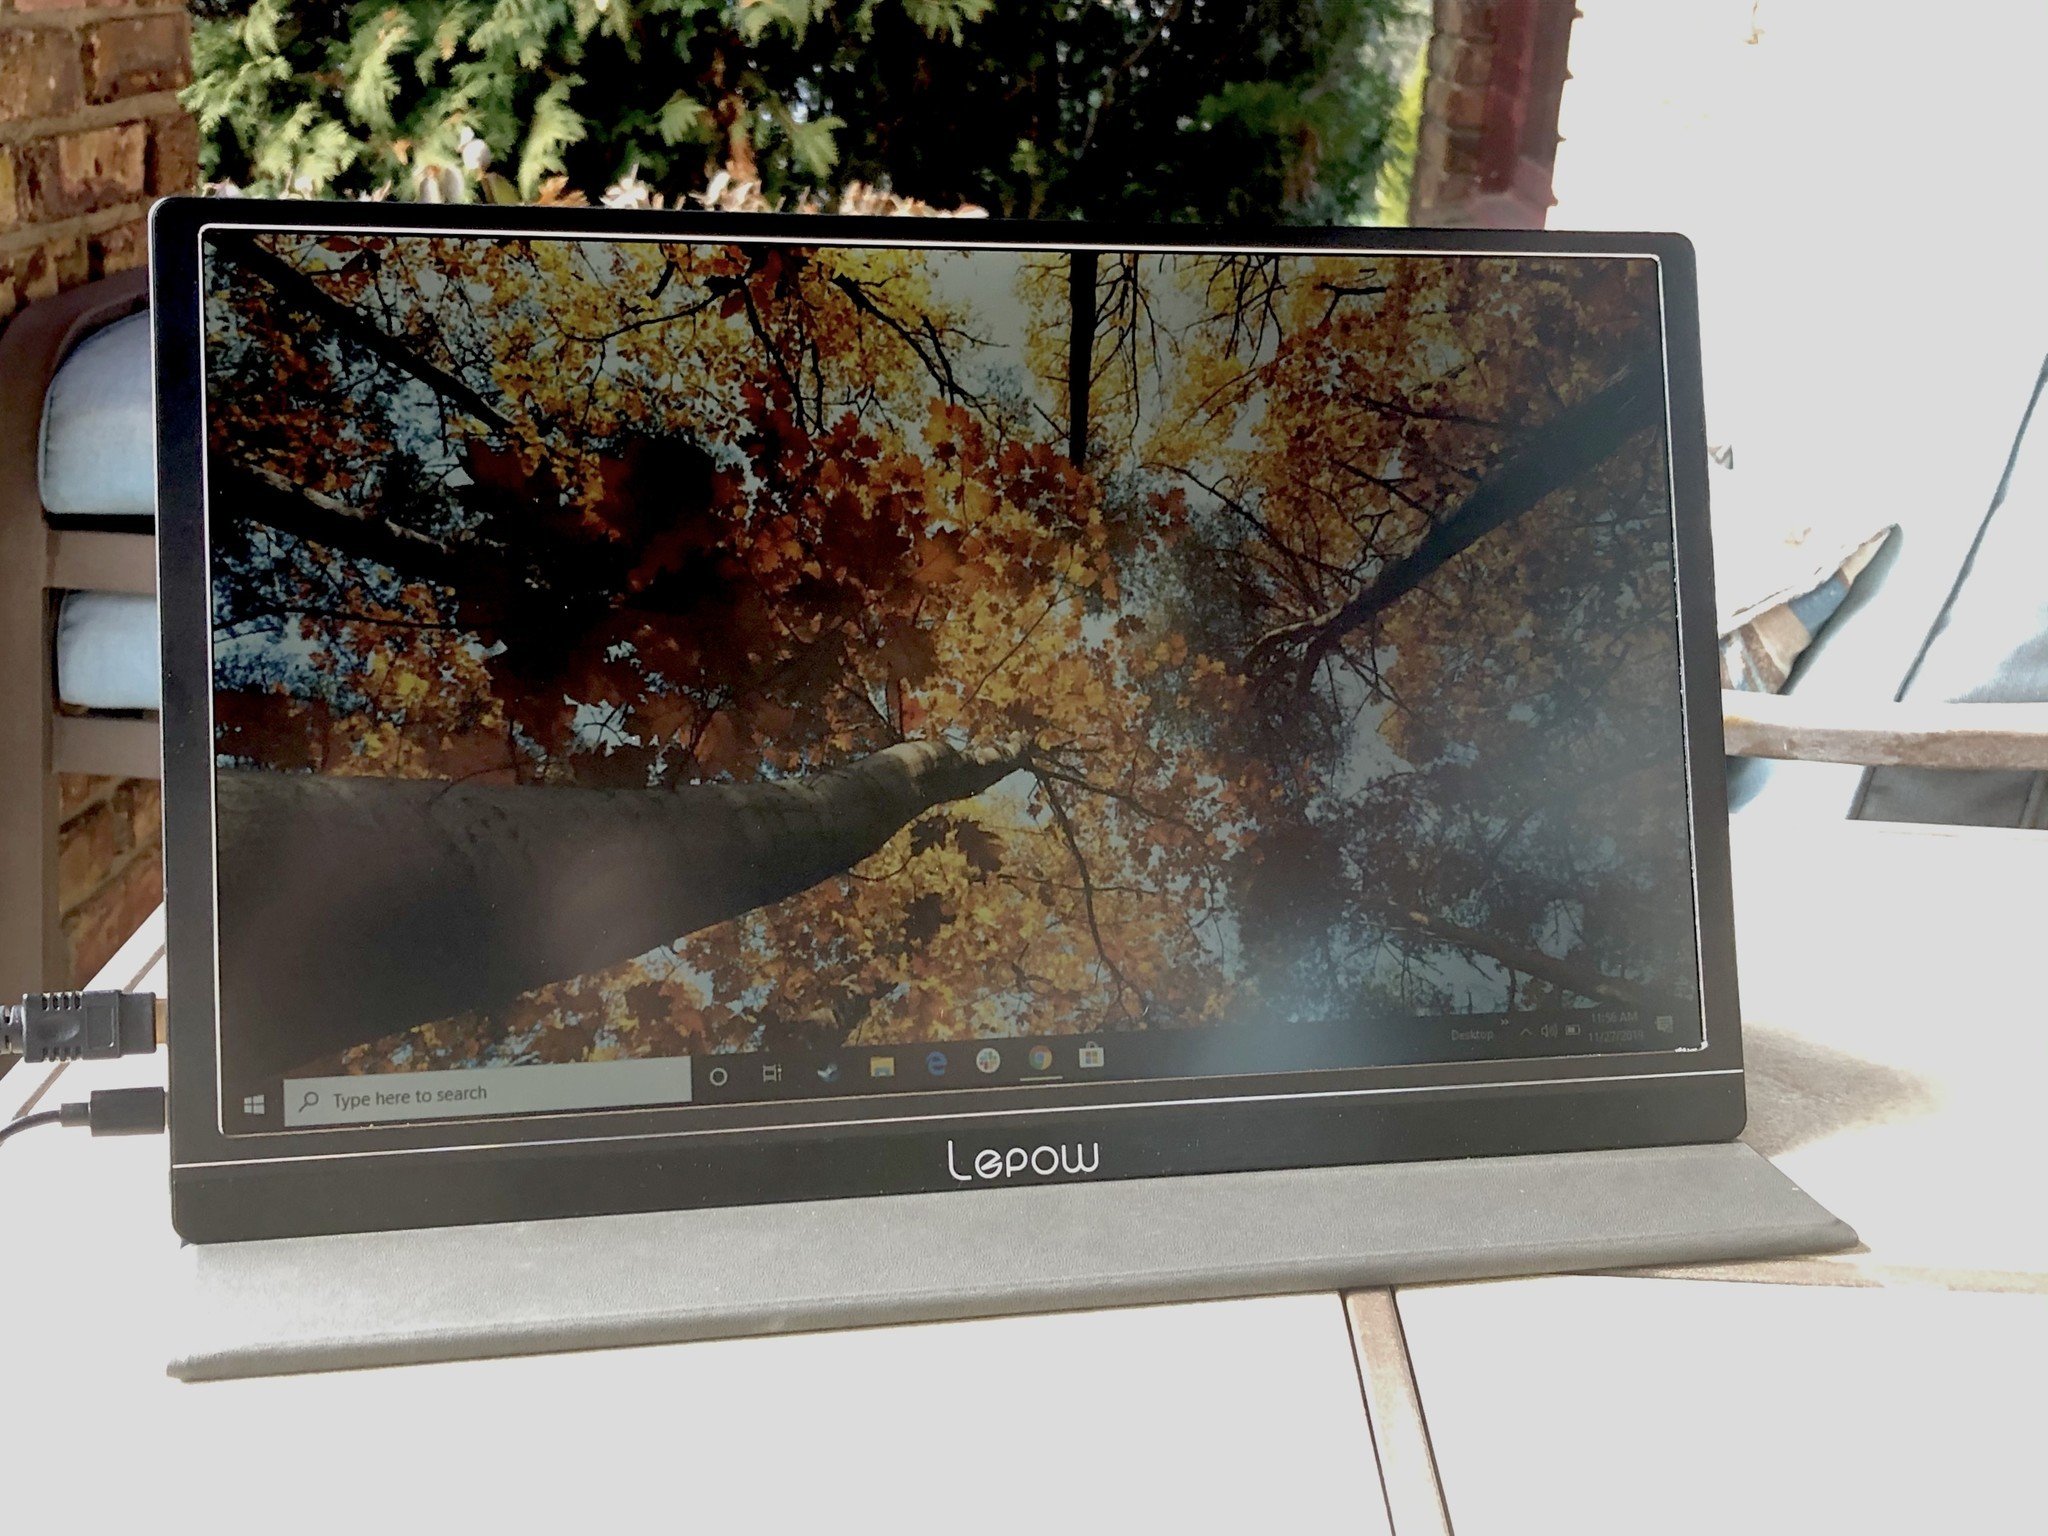 Lepow 15.6-inch external USB monitor is a huge $60 cheaper for Cyber Monday